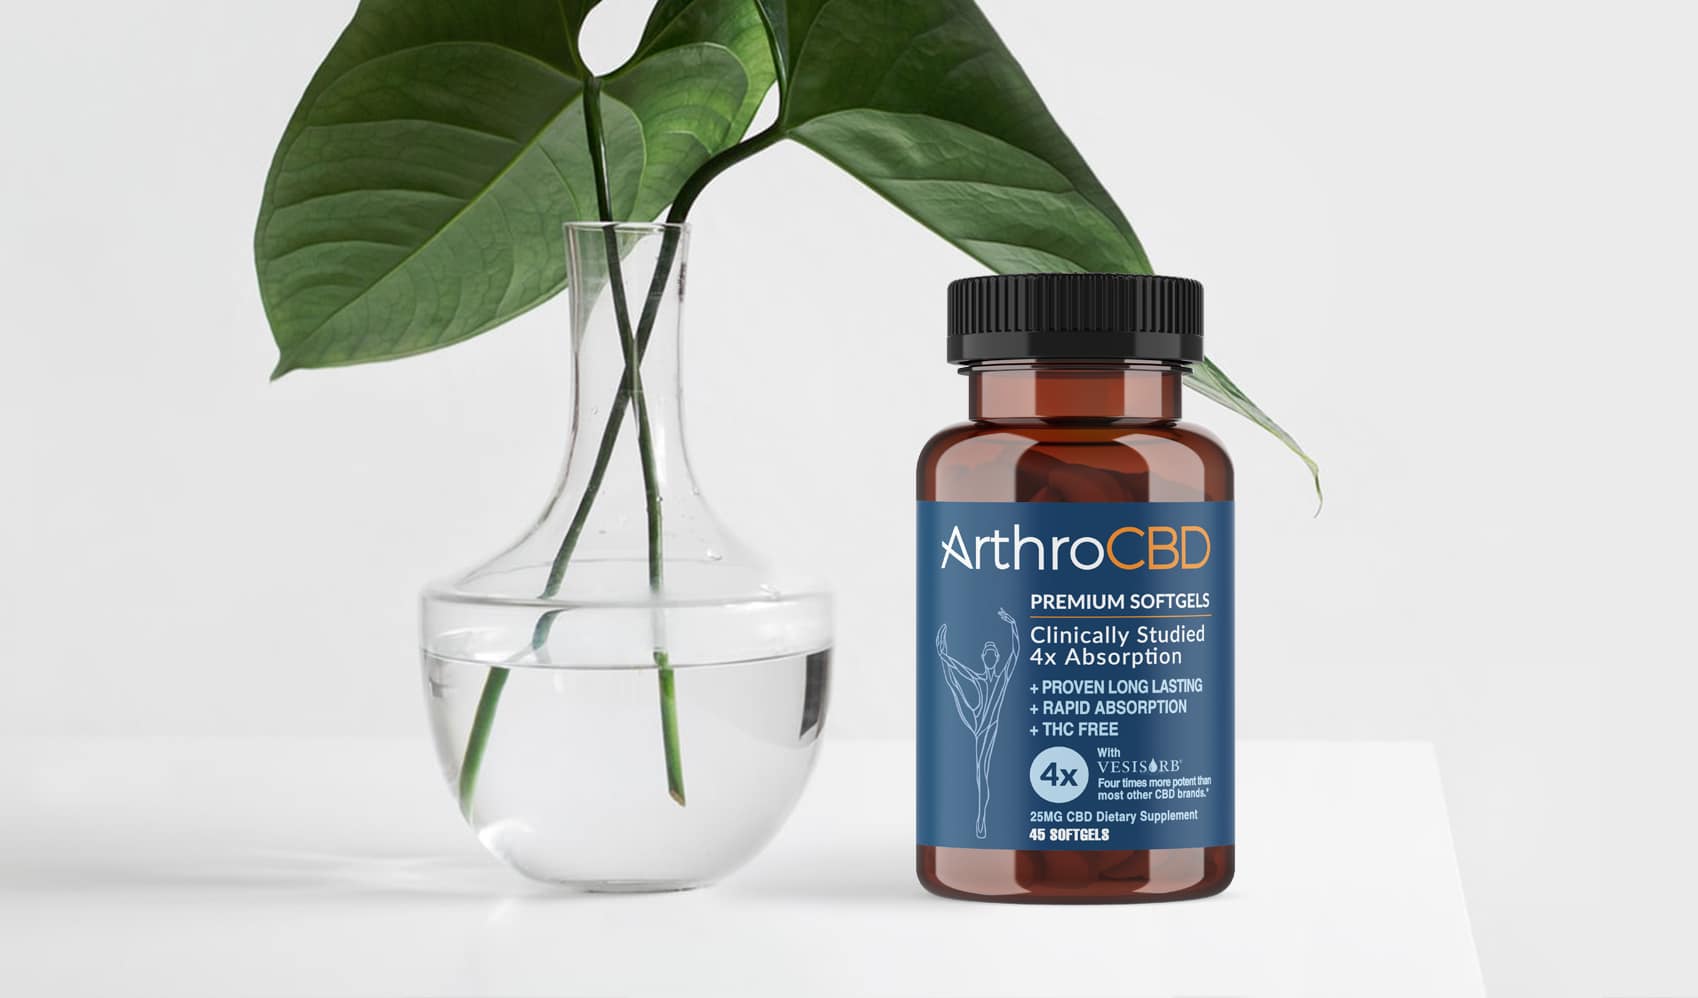 ArthroCBD labels and packaging design with logo, images and phrases “backed by science,” and “clinically studied 4x absorption.”